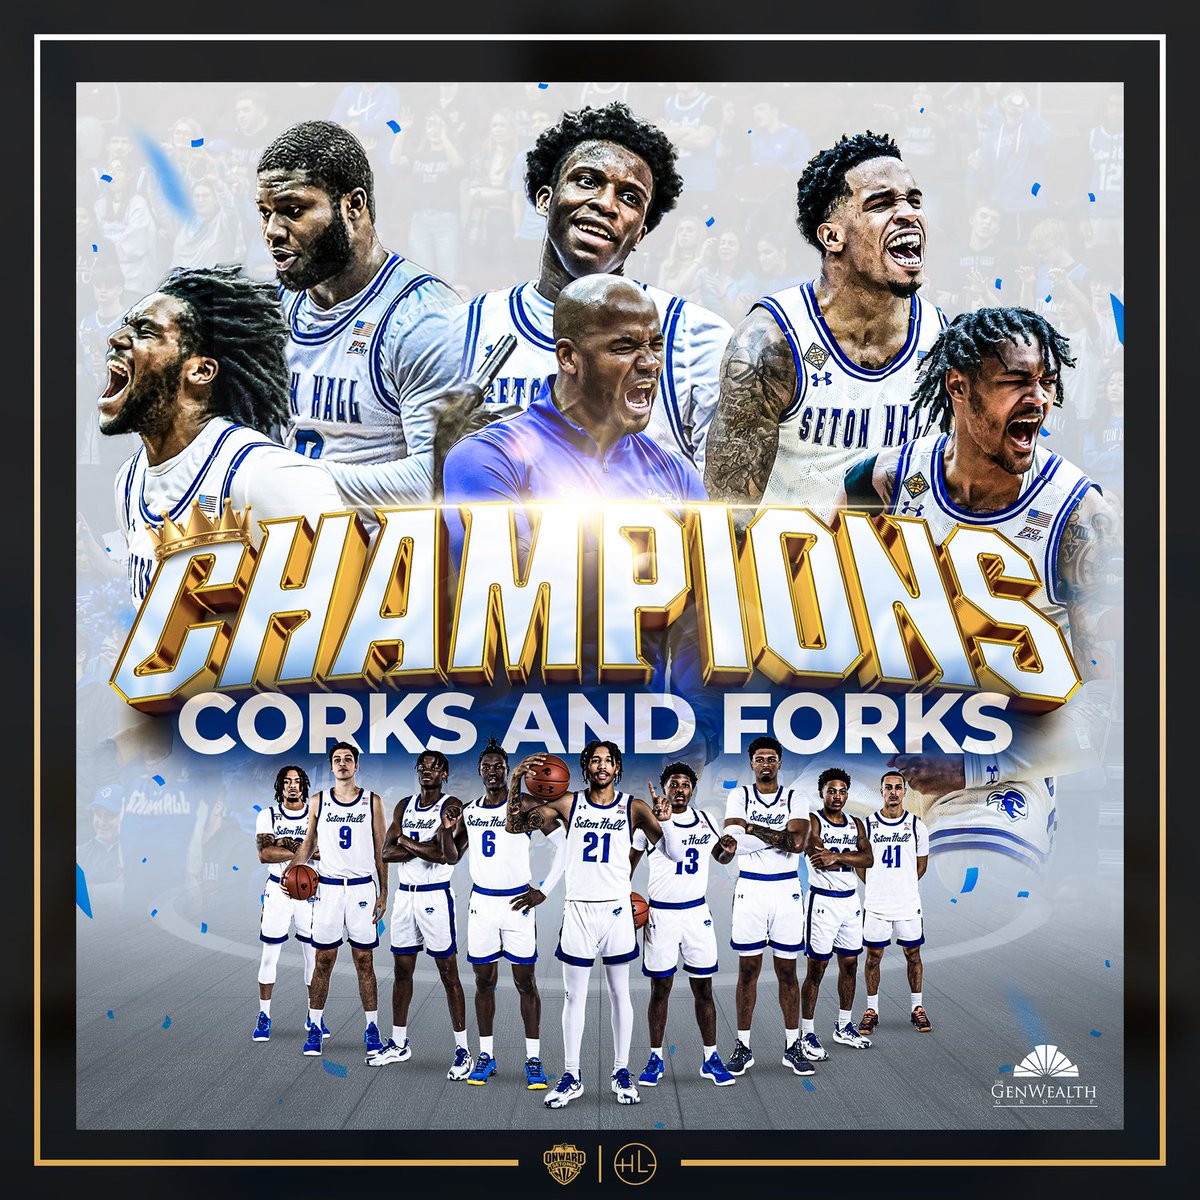 Pirates Fans, big update on Corks & Forks: Our friends @OnwardSetonia_ are now going to run the event to continue supporting student-athlete NIL opportunities! Same great event plus Onward will be honoring the NIT champs @SetonHallMBB! #HALLin Register: onwardsetonia.com/events/corks-a…